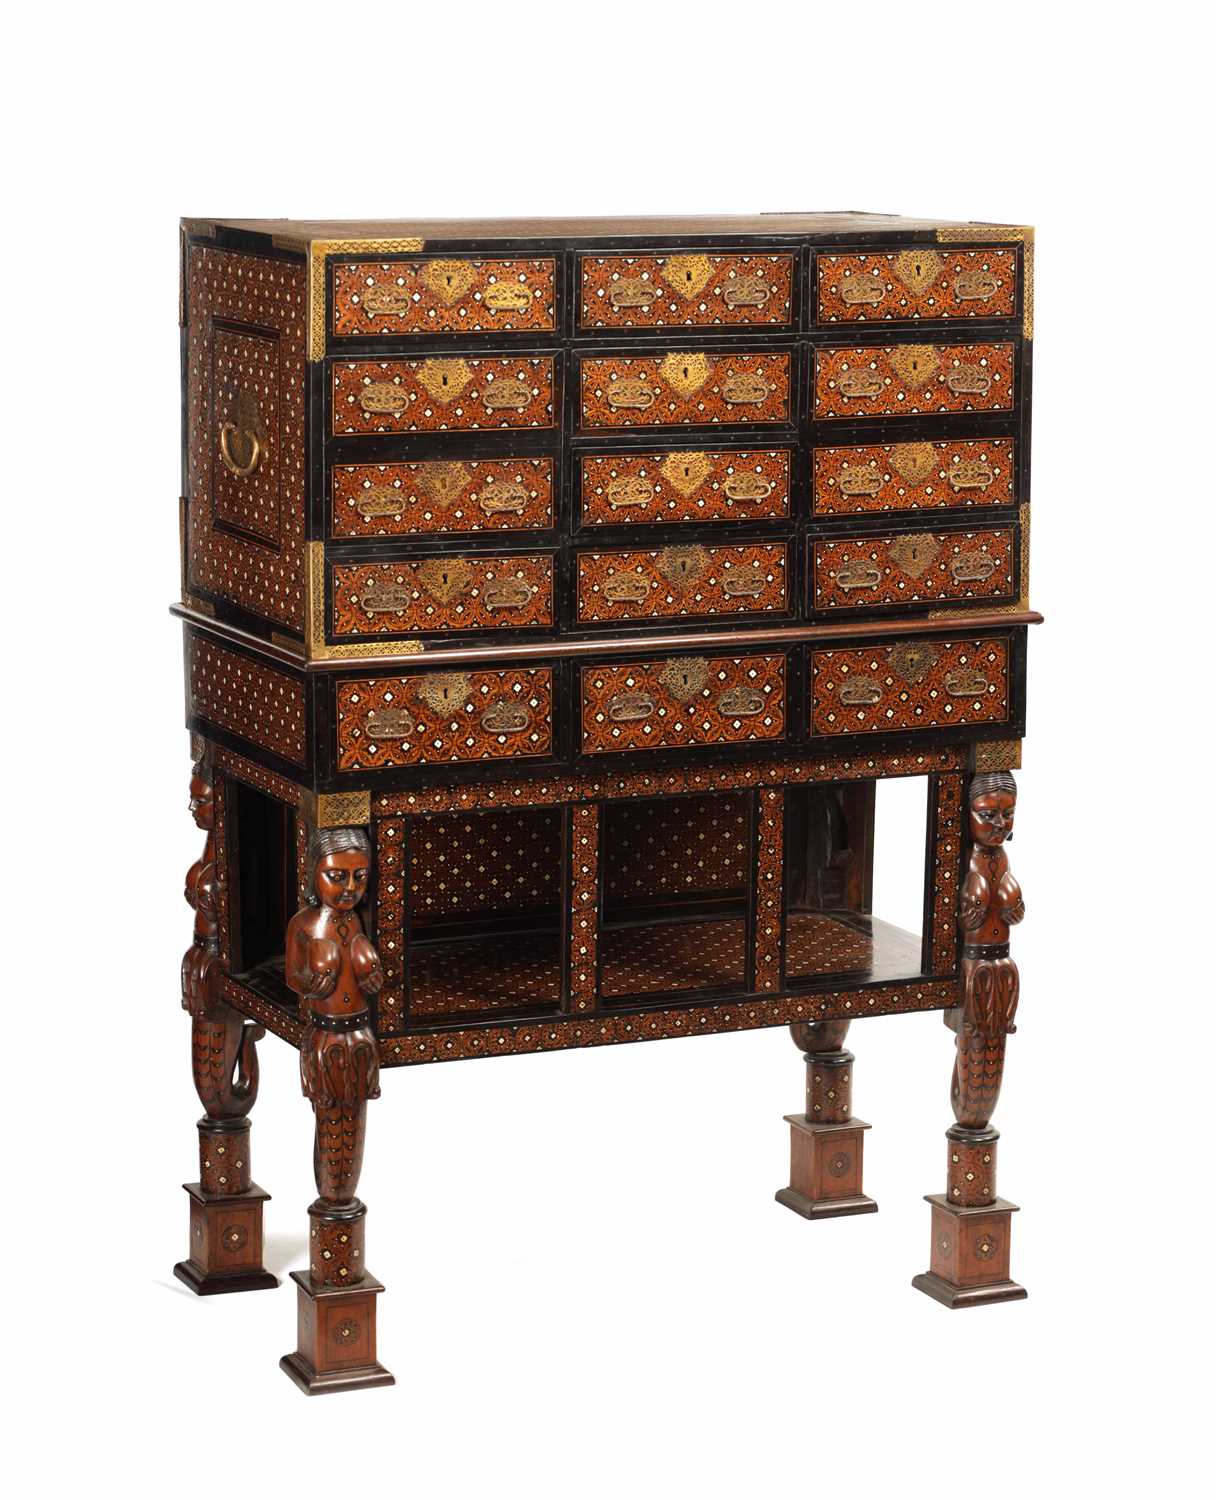 AN IMPORTANT LATE 17TH CENTURY INDO-PORTUGUESE IVORY INLAID PADOUCK AND EBONY COLLECTORS CABINET ON